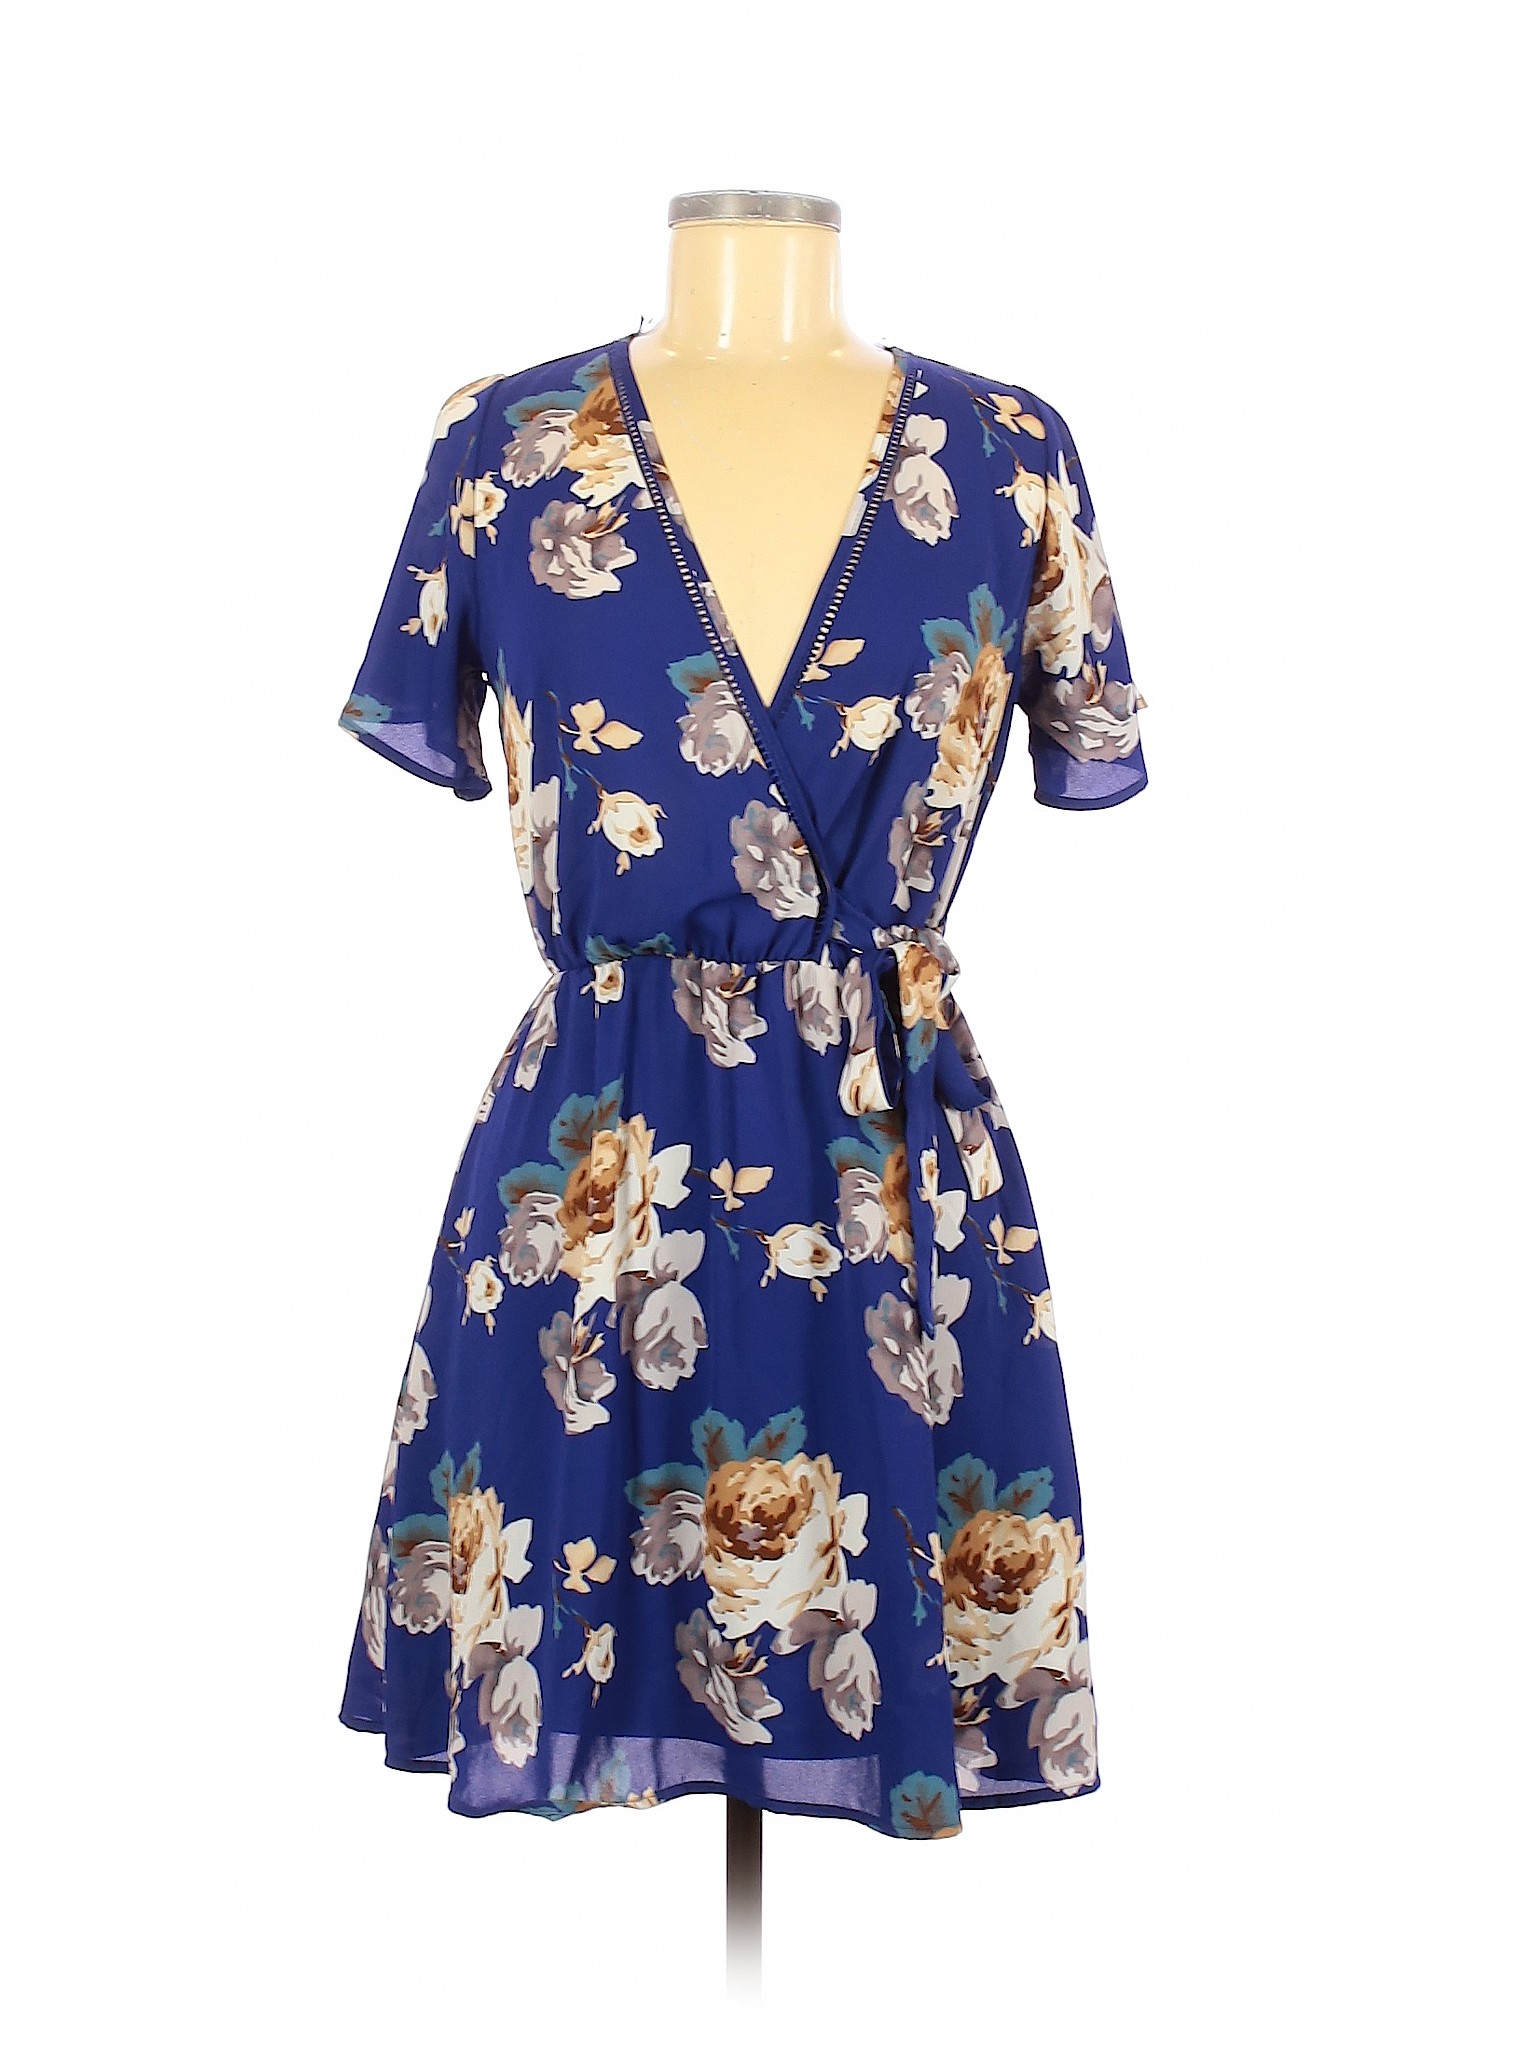 Sienna Sky Women's Dresses On Sale Up To 90% Off Retail | thredUP